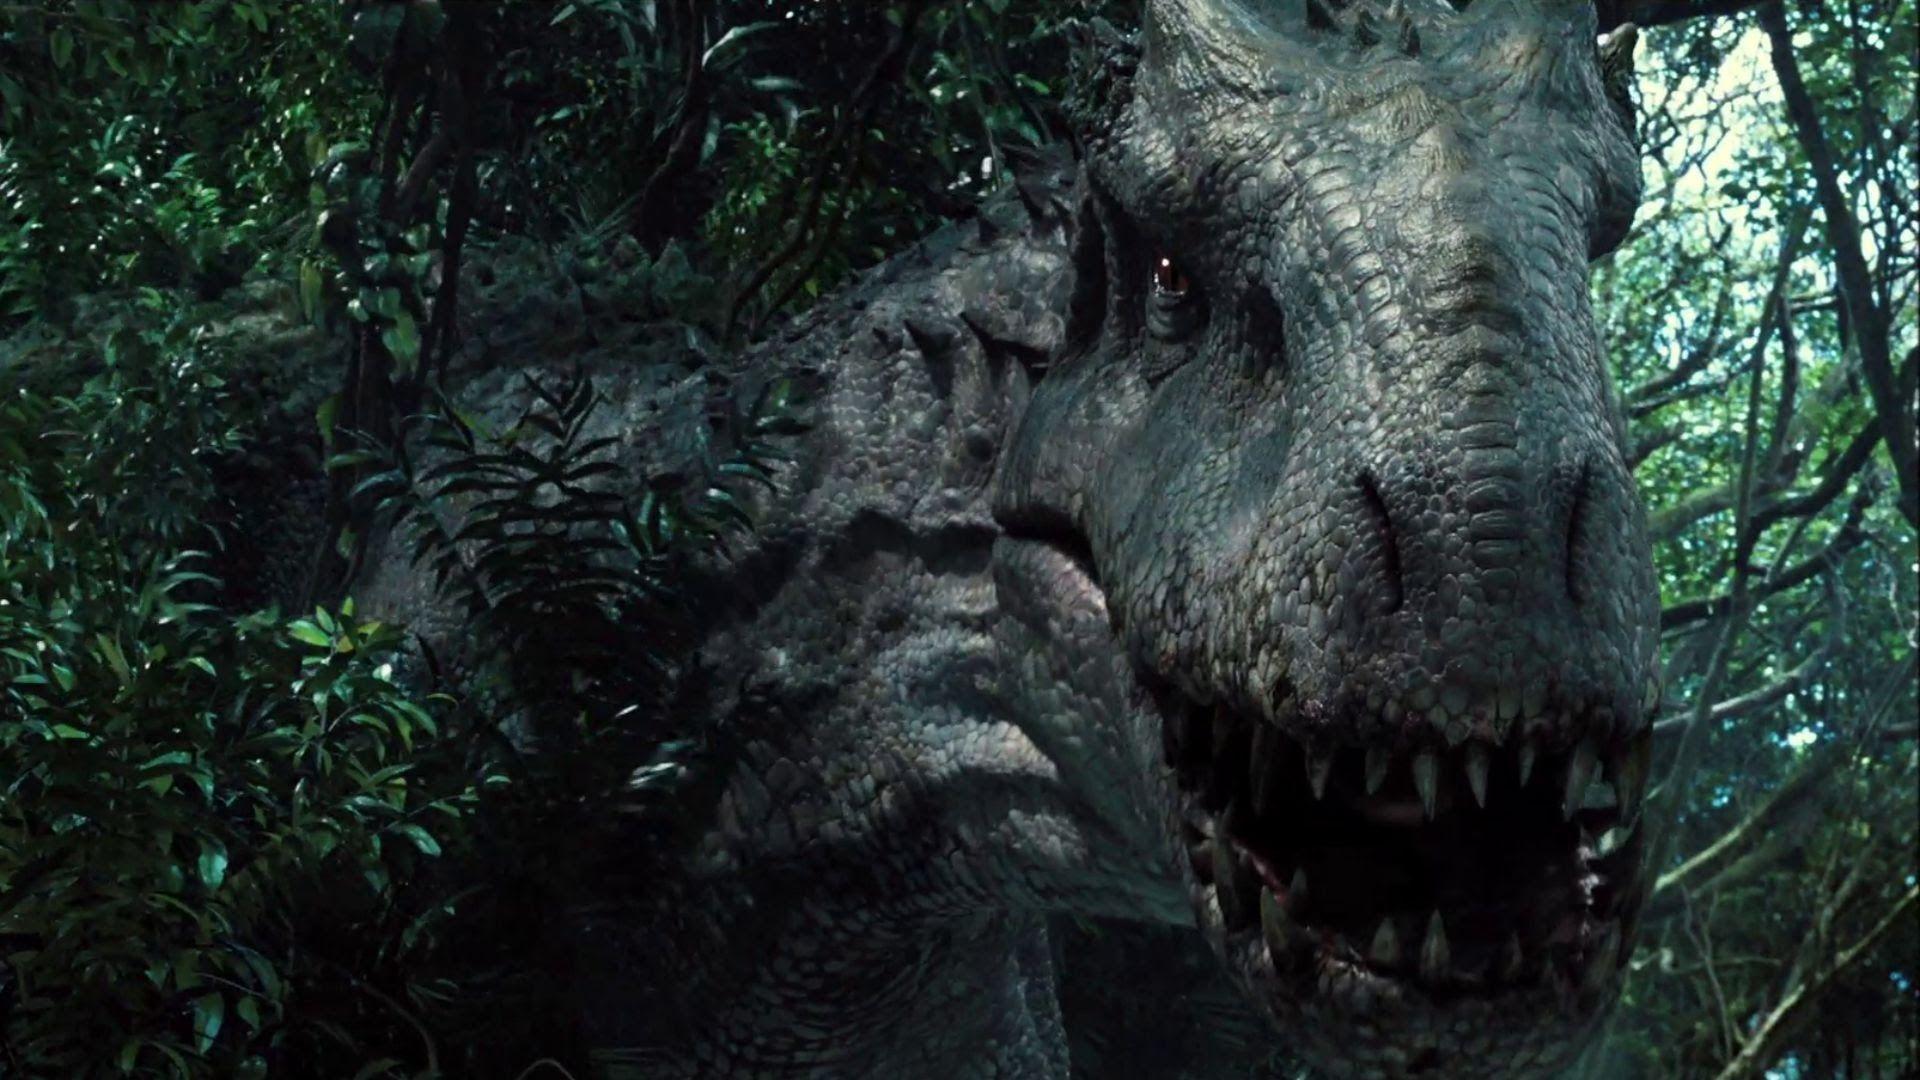 Jurassic World 2' Will Be More Suspenseful and Scary